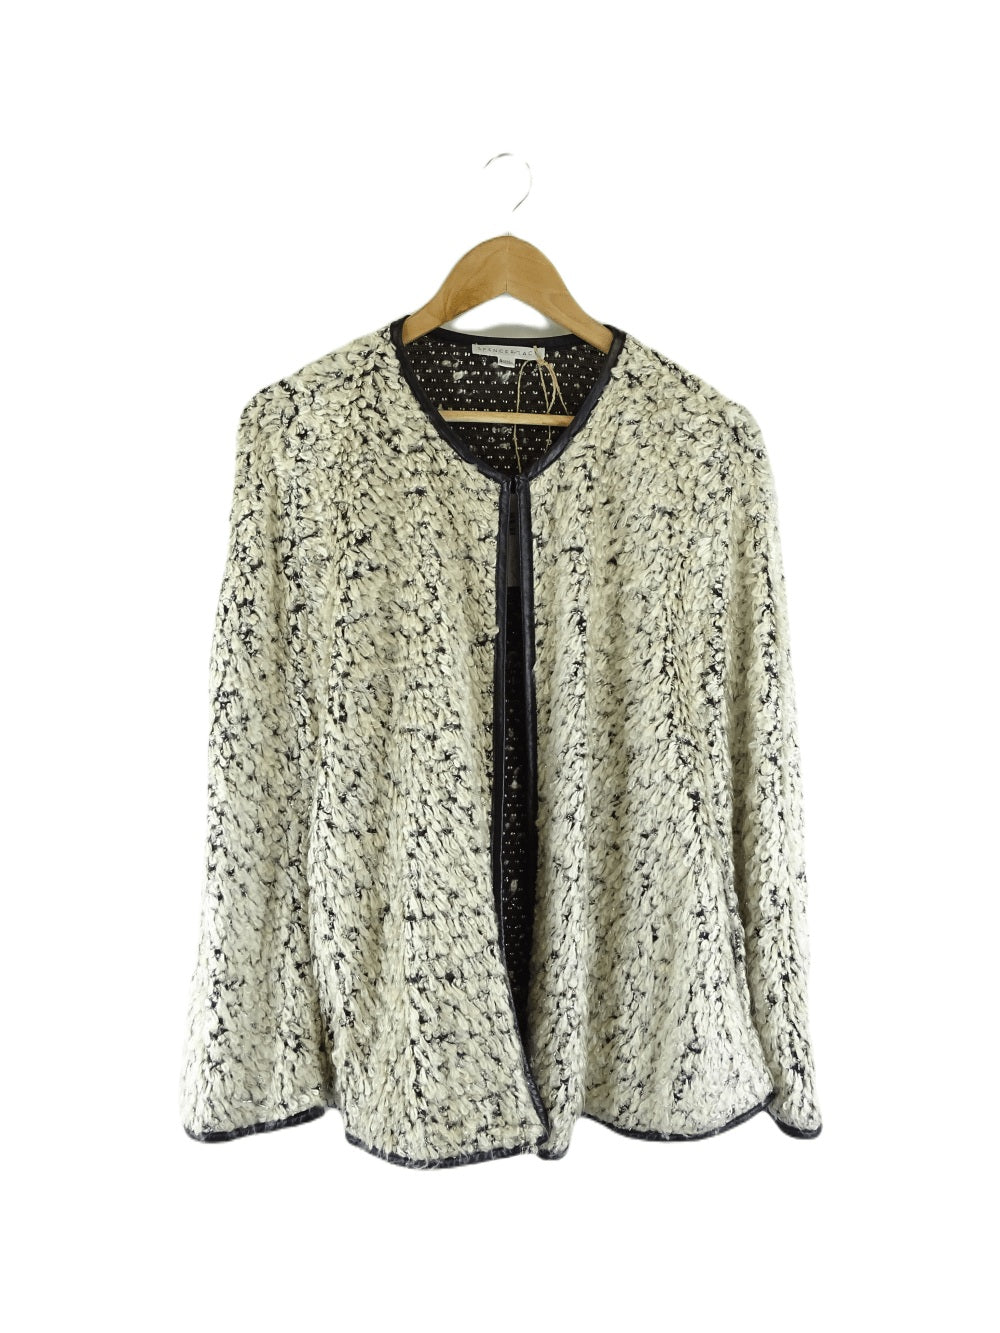 Spencer Lacy Fluffy Cardigan Brown S/M